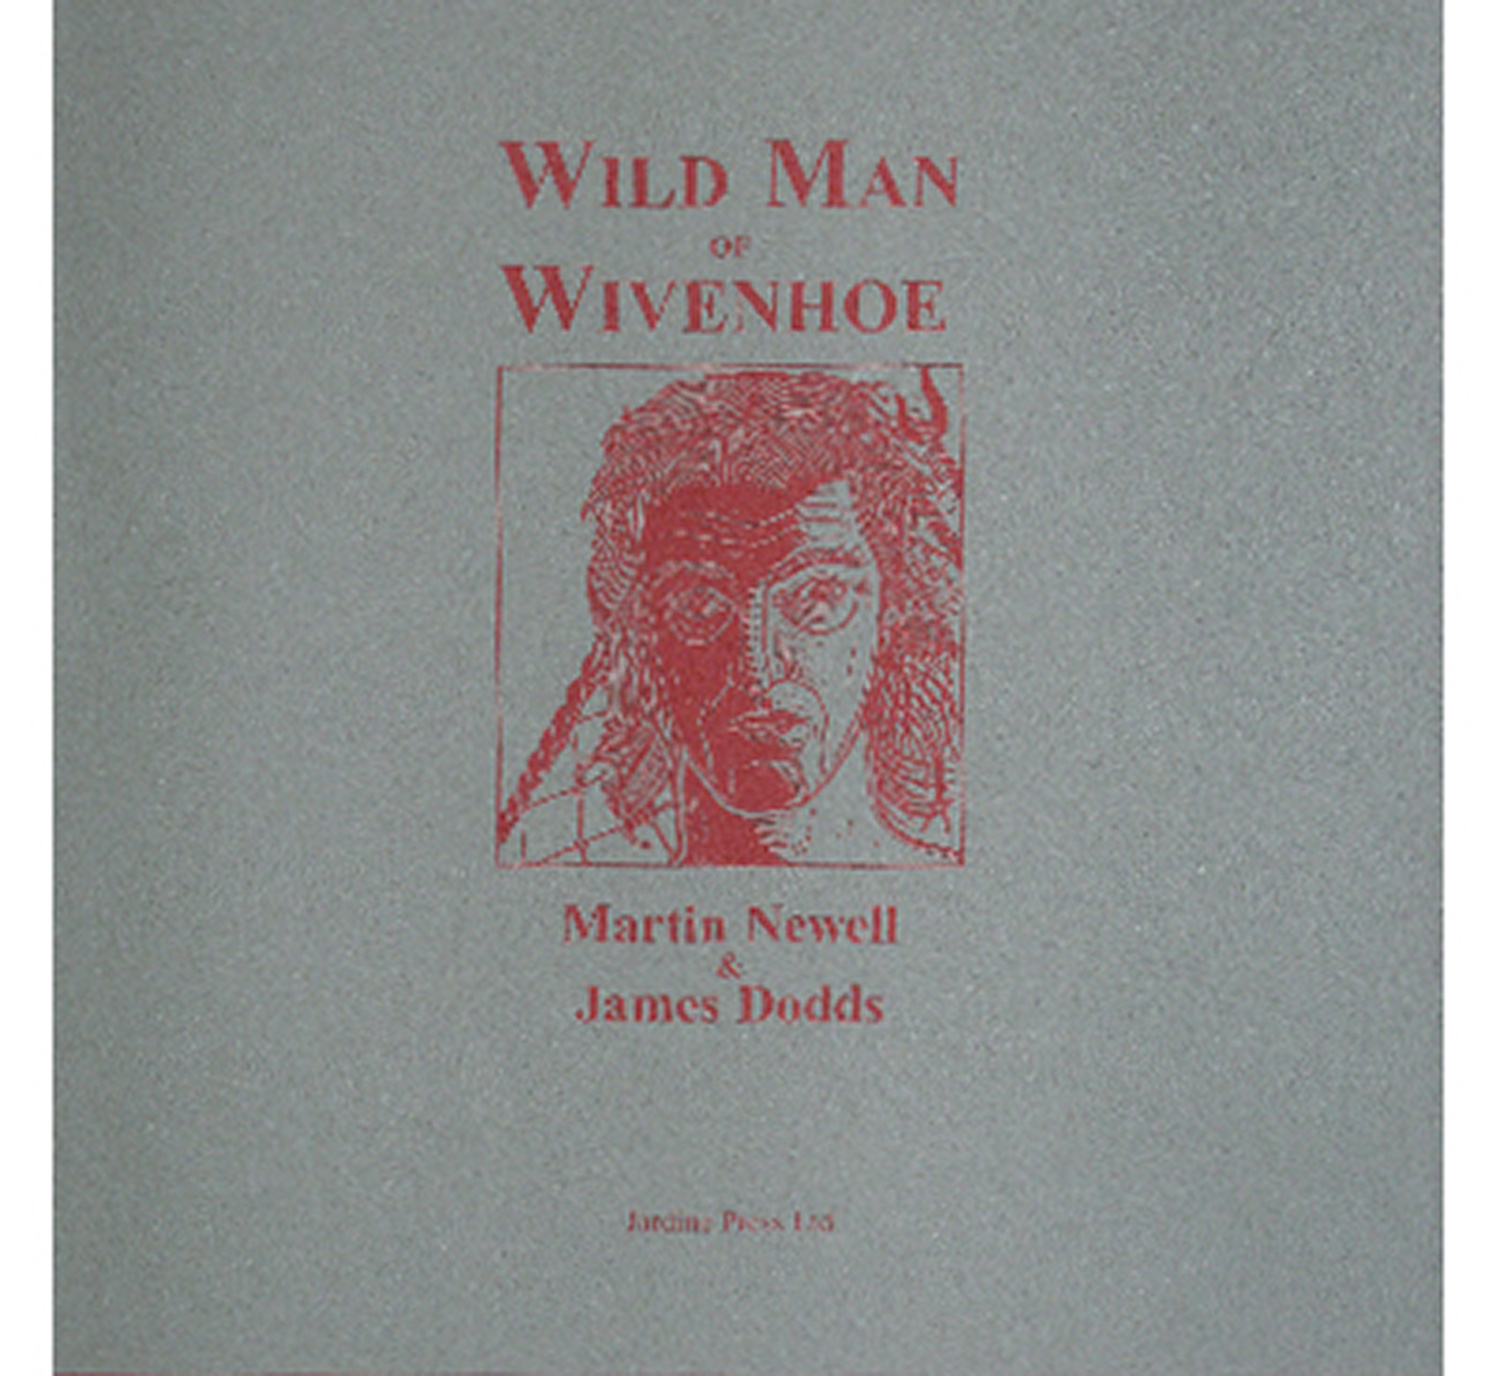 Wild Man of Wivenhoe by James Dodds